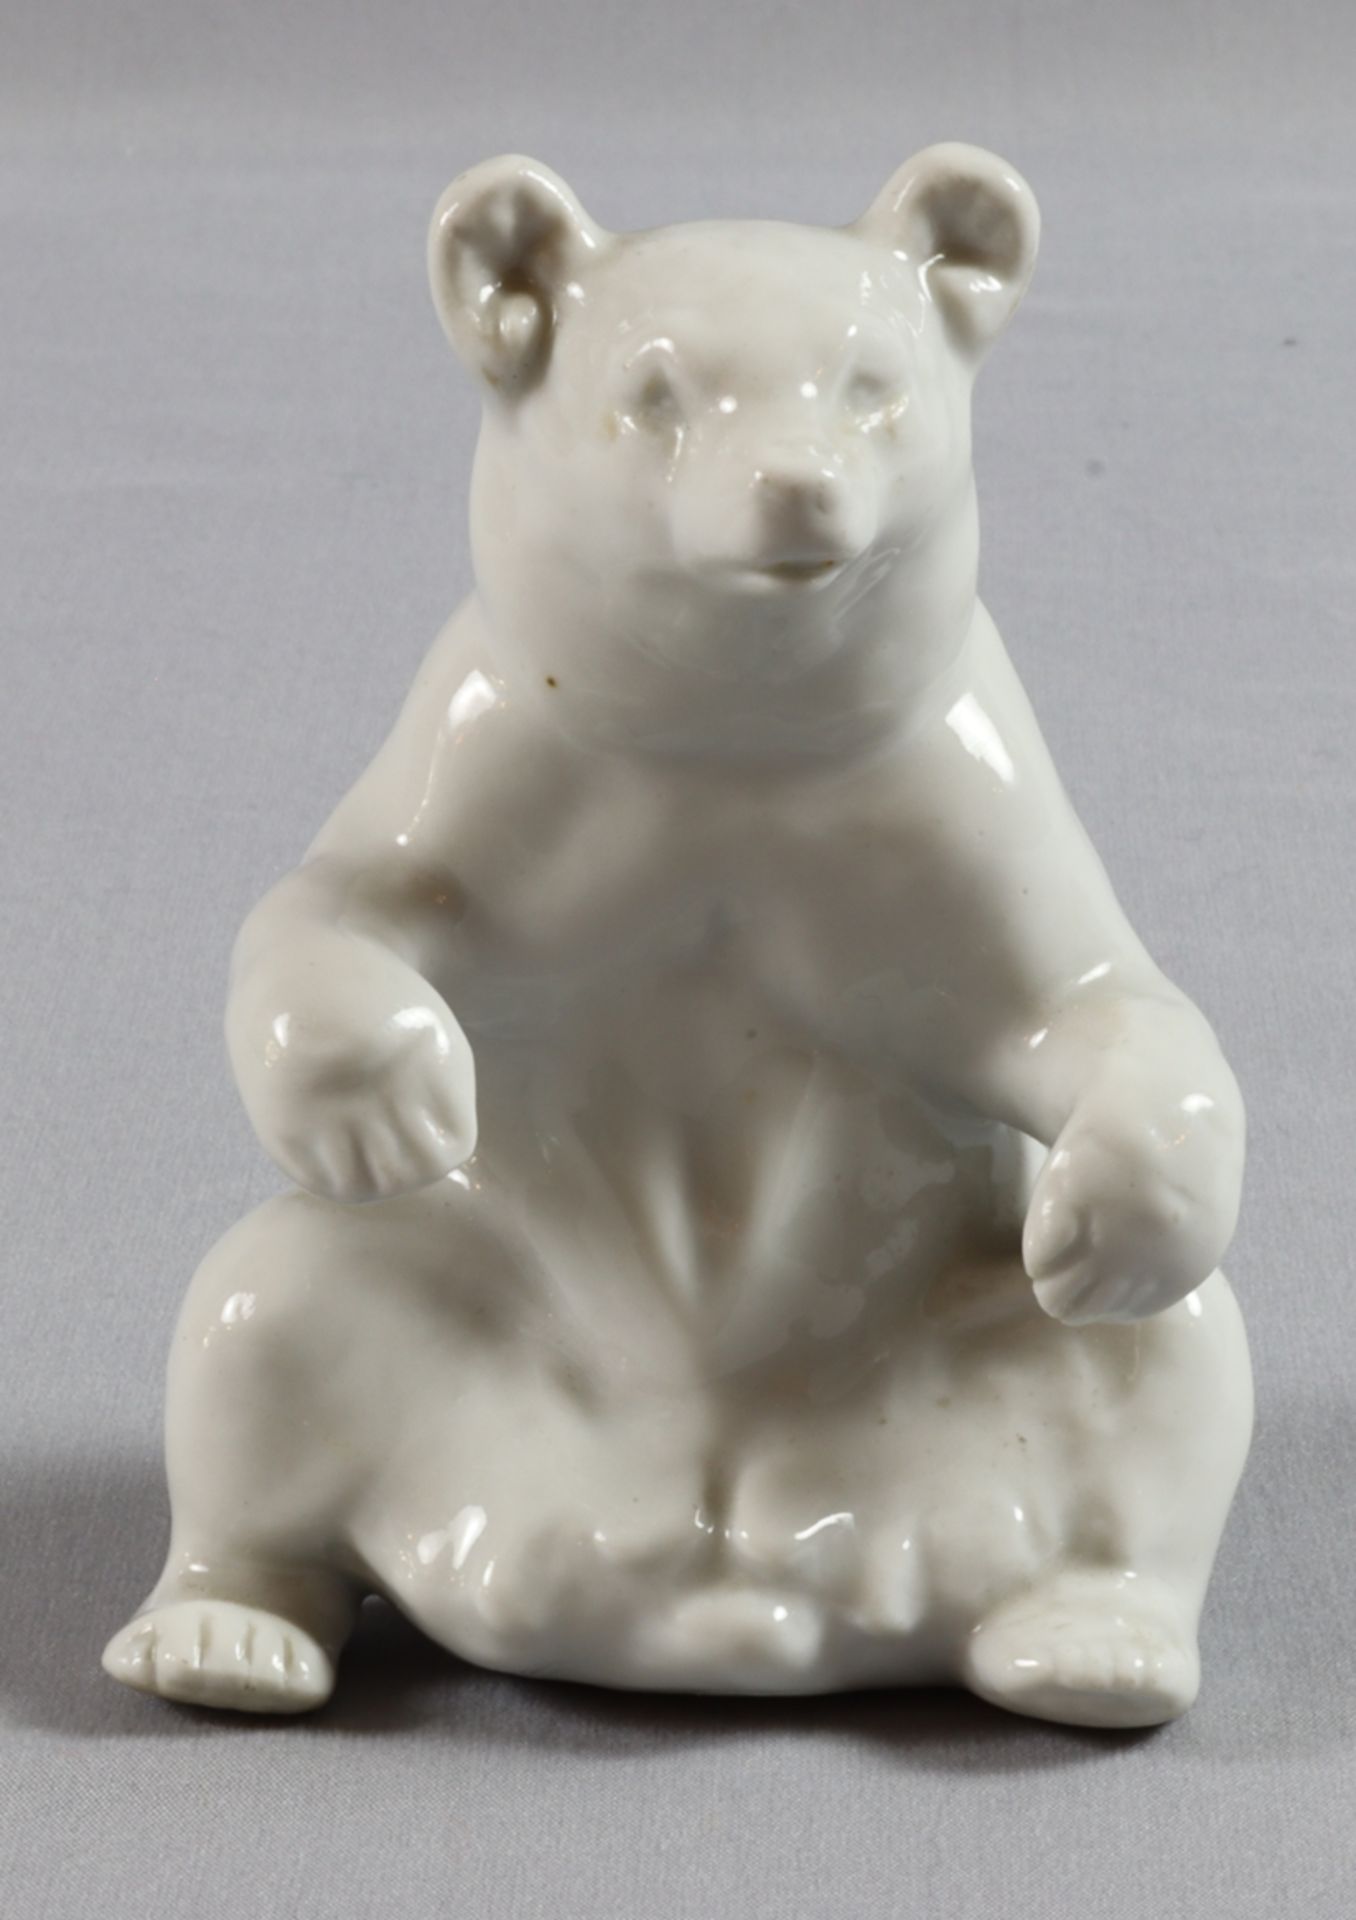 Porcelain figures, two polar bears early 20th century, German - Image 2 of 4